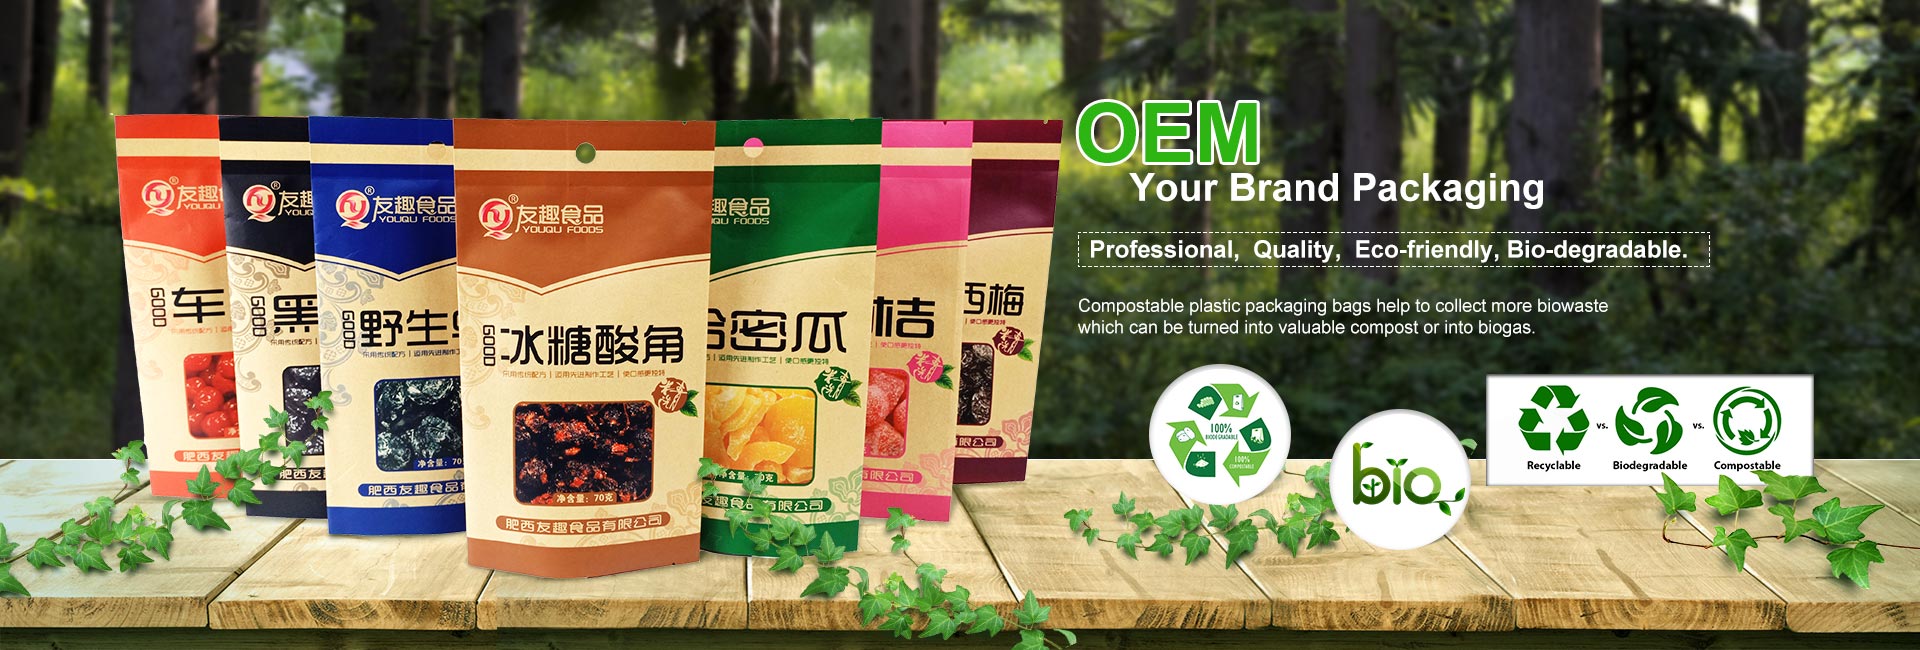 OEM Your Brand Packaging